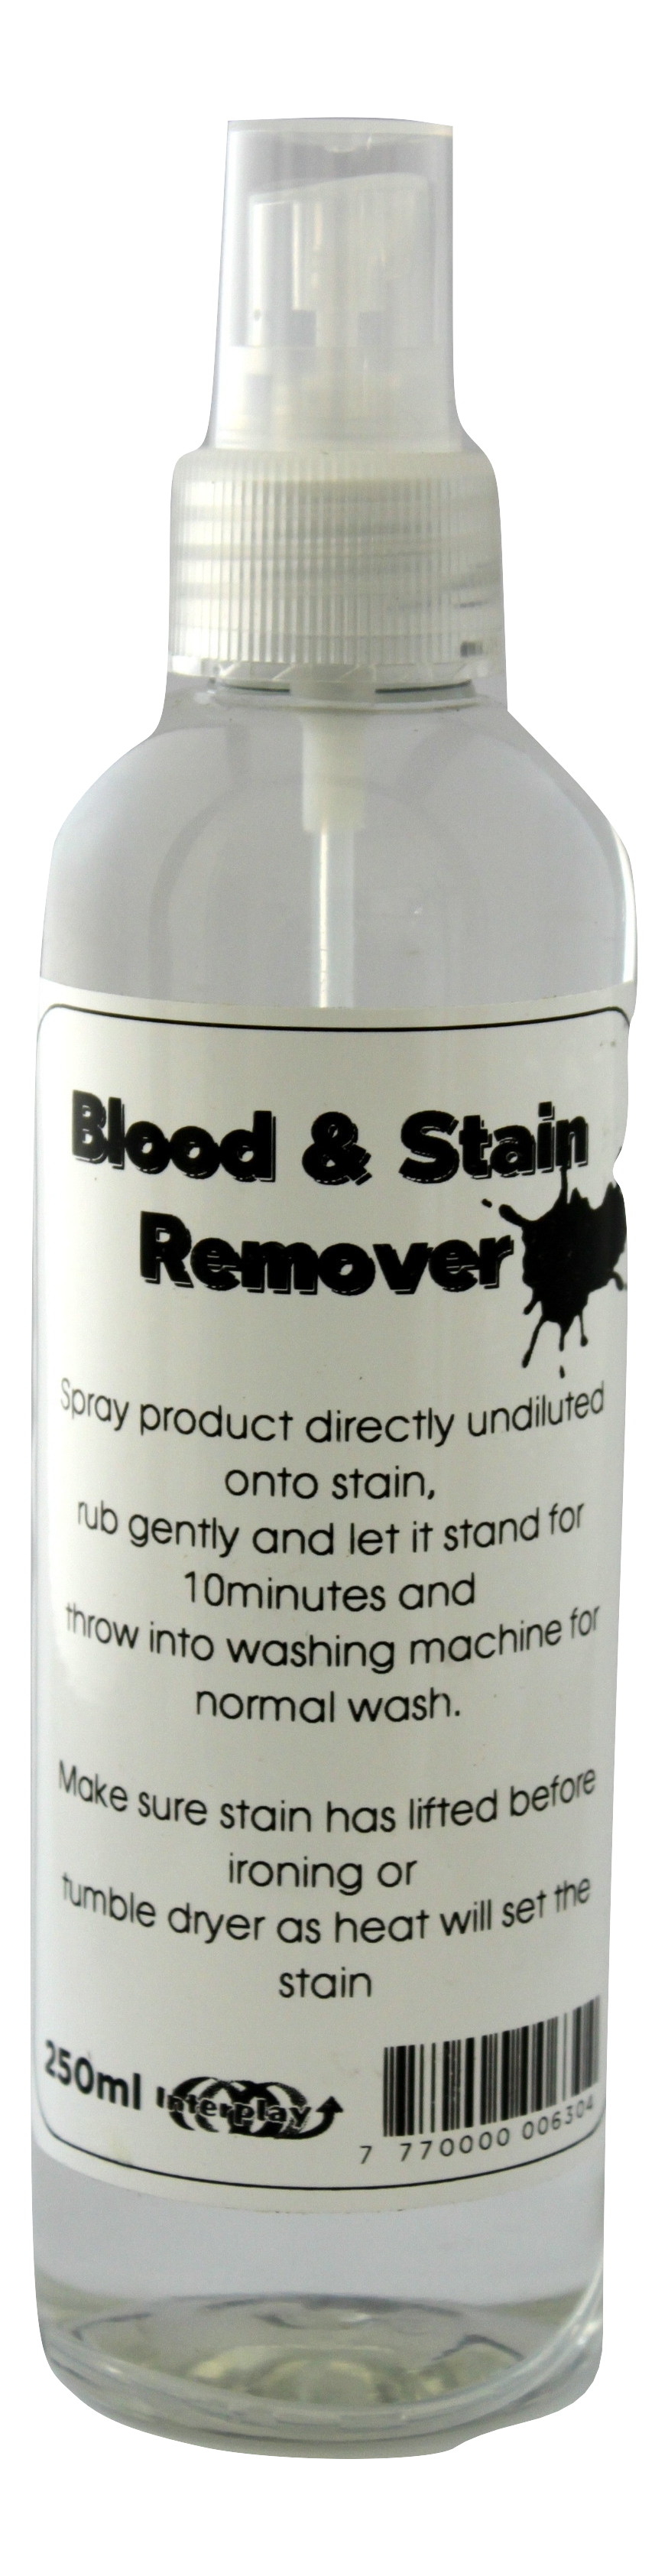 blood-&-stain-remover